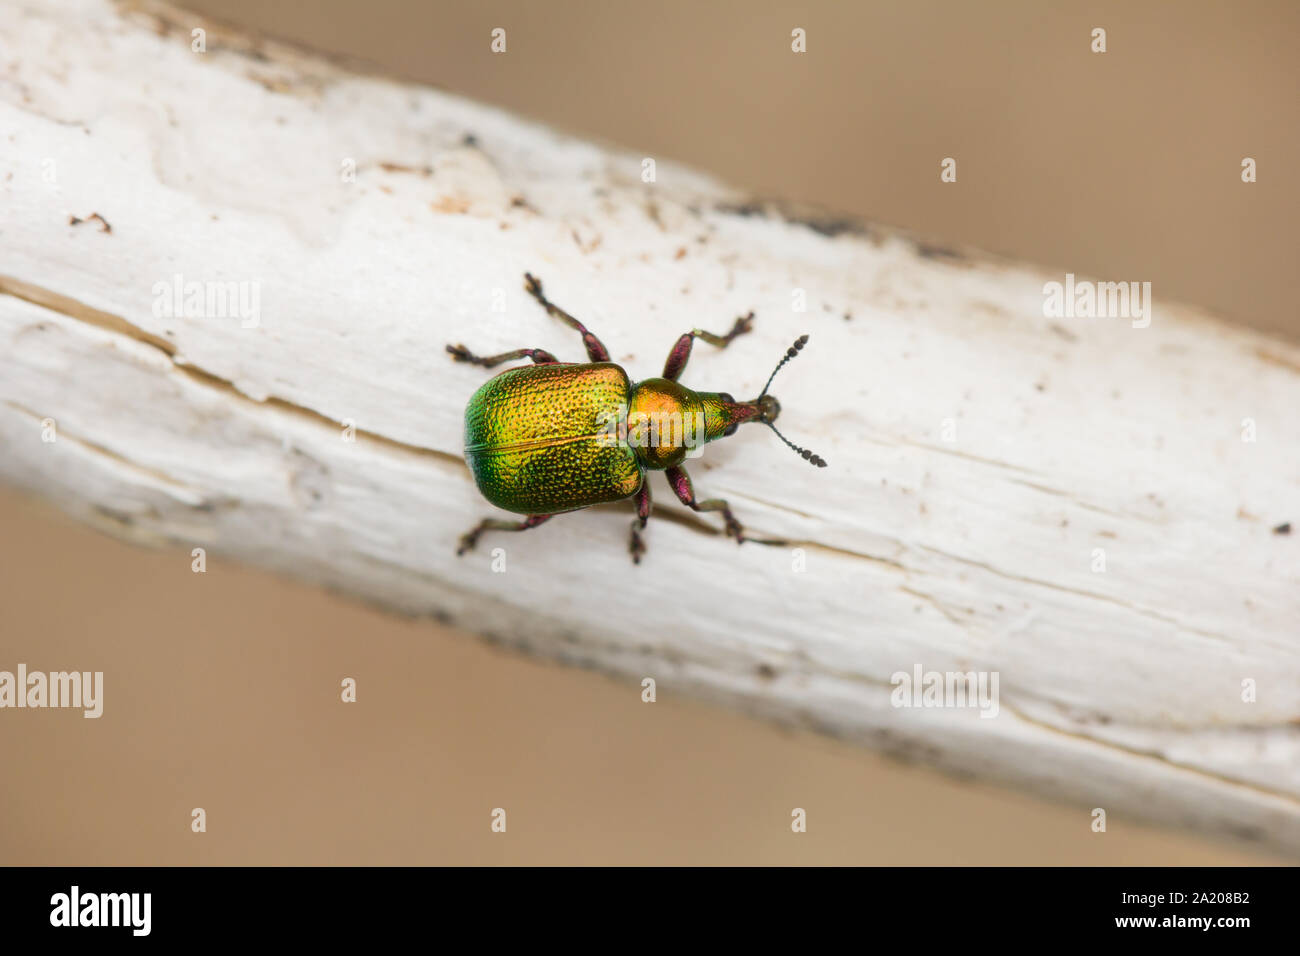 Leaf rolling weevil Stock Photo